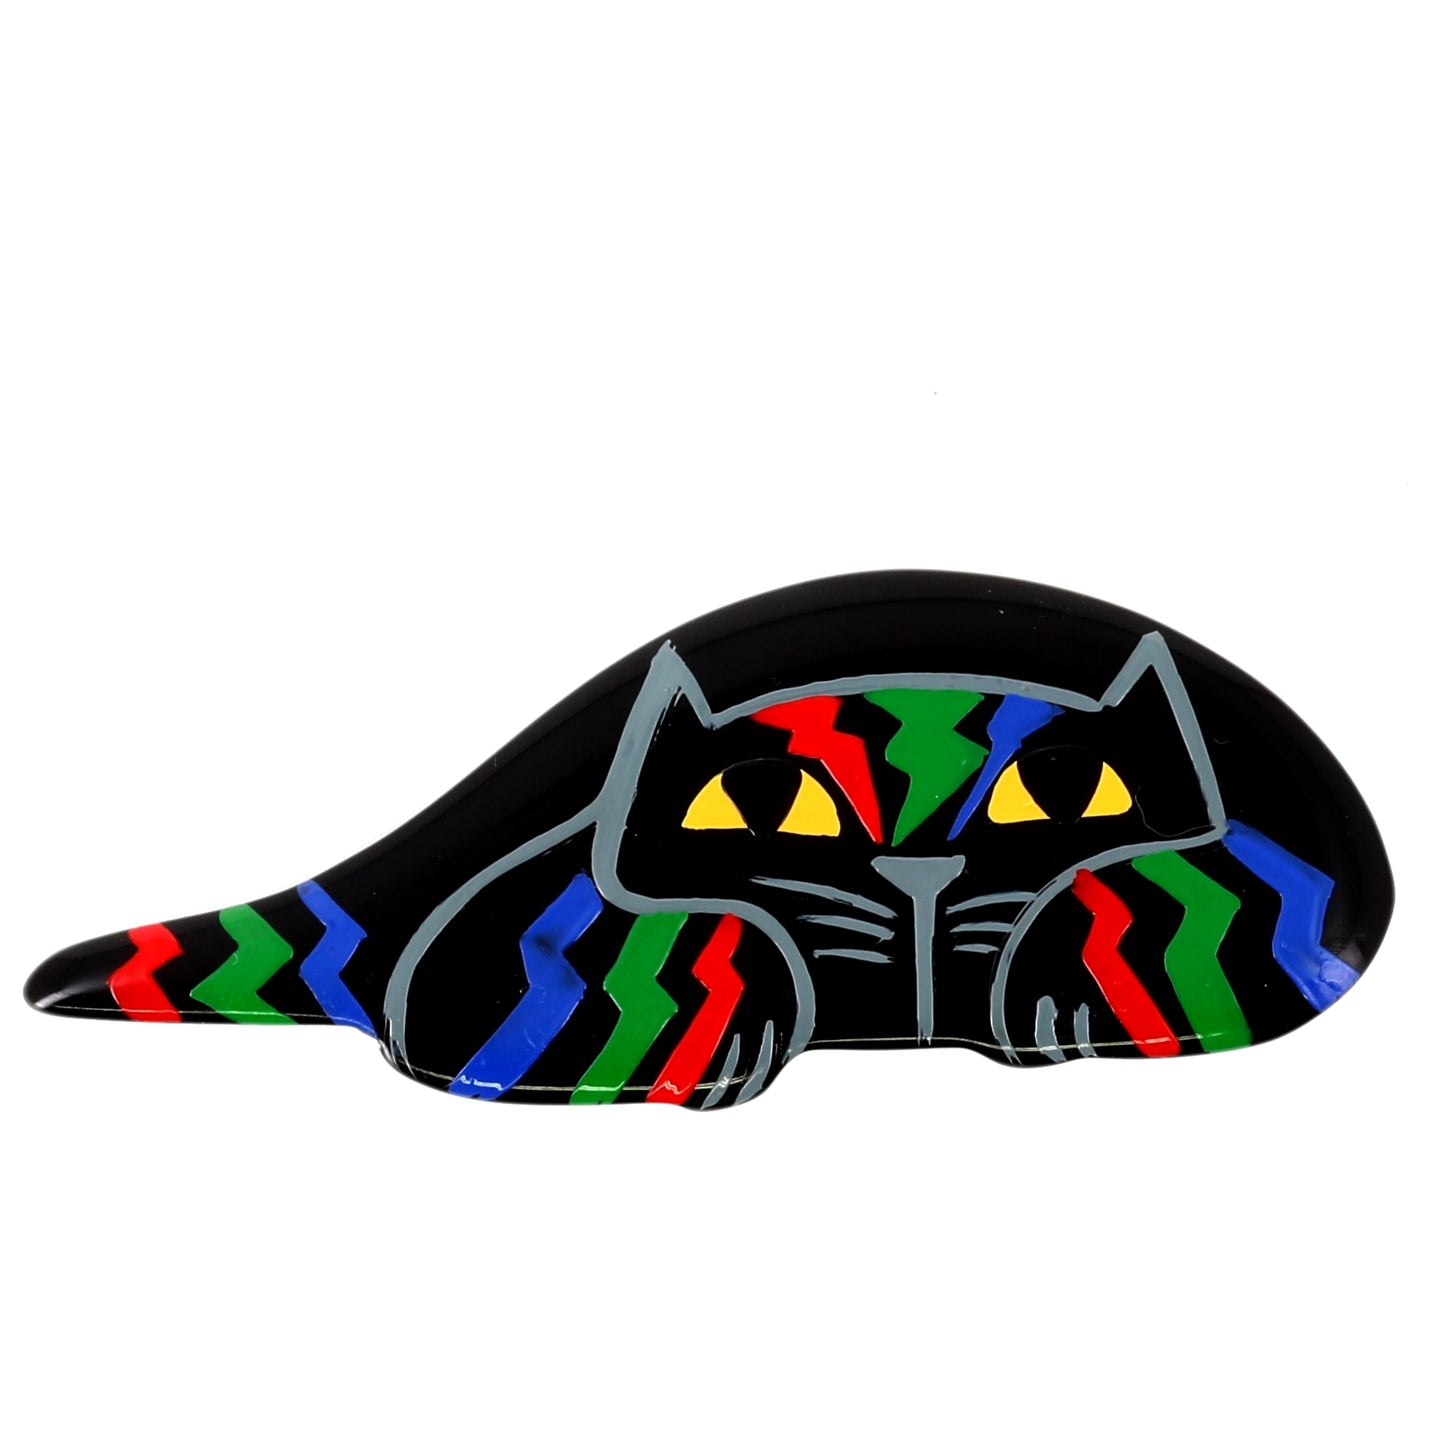 Black Riton Cat Brooch with blue, red and green tigers